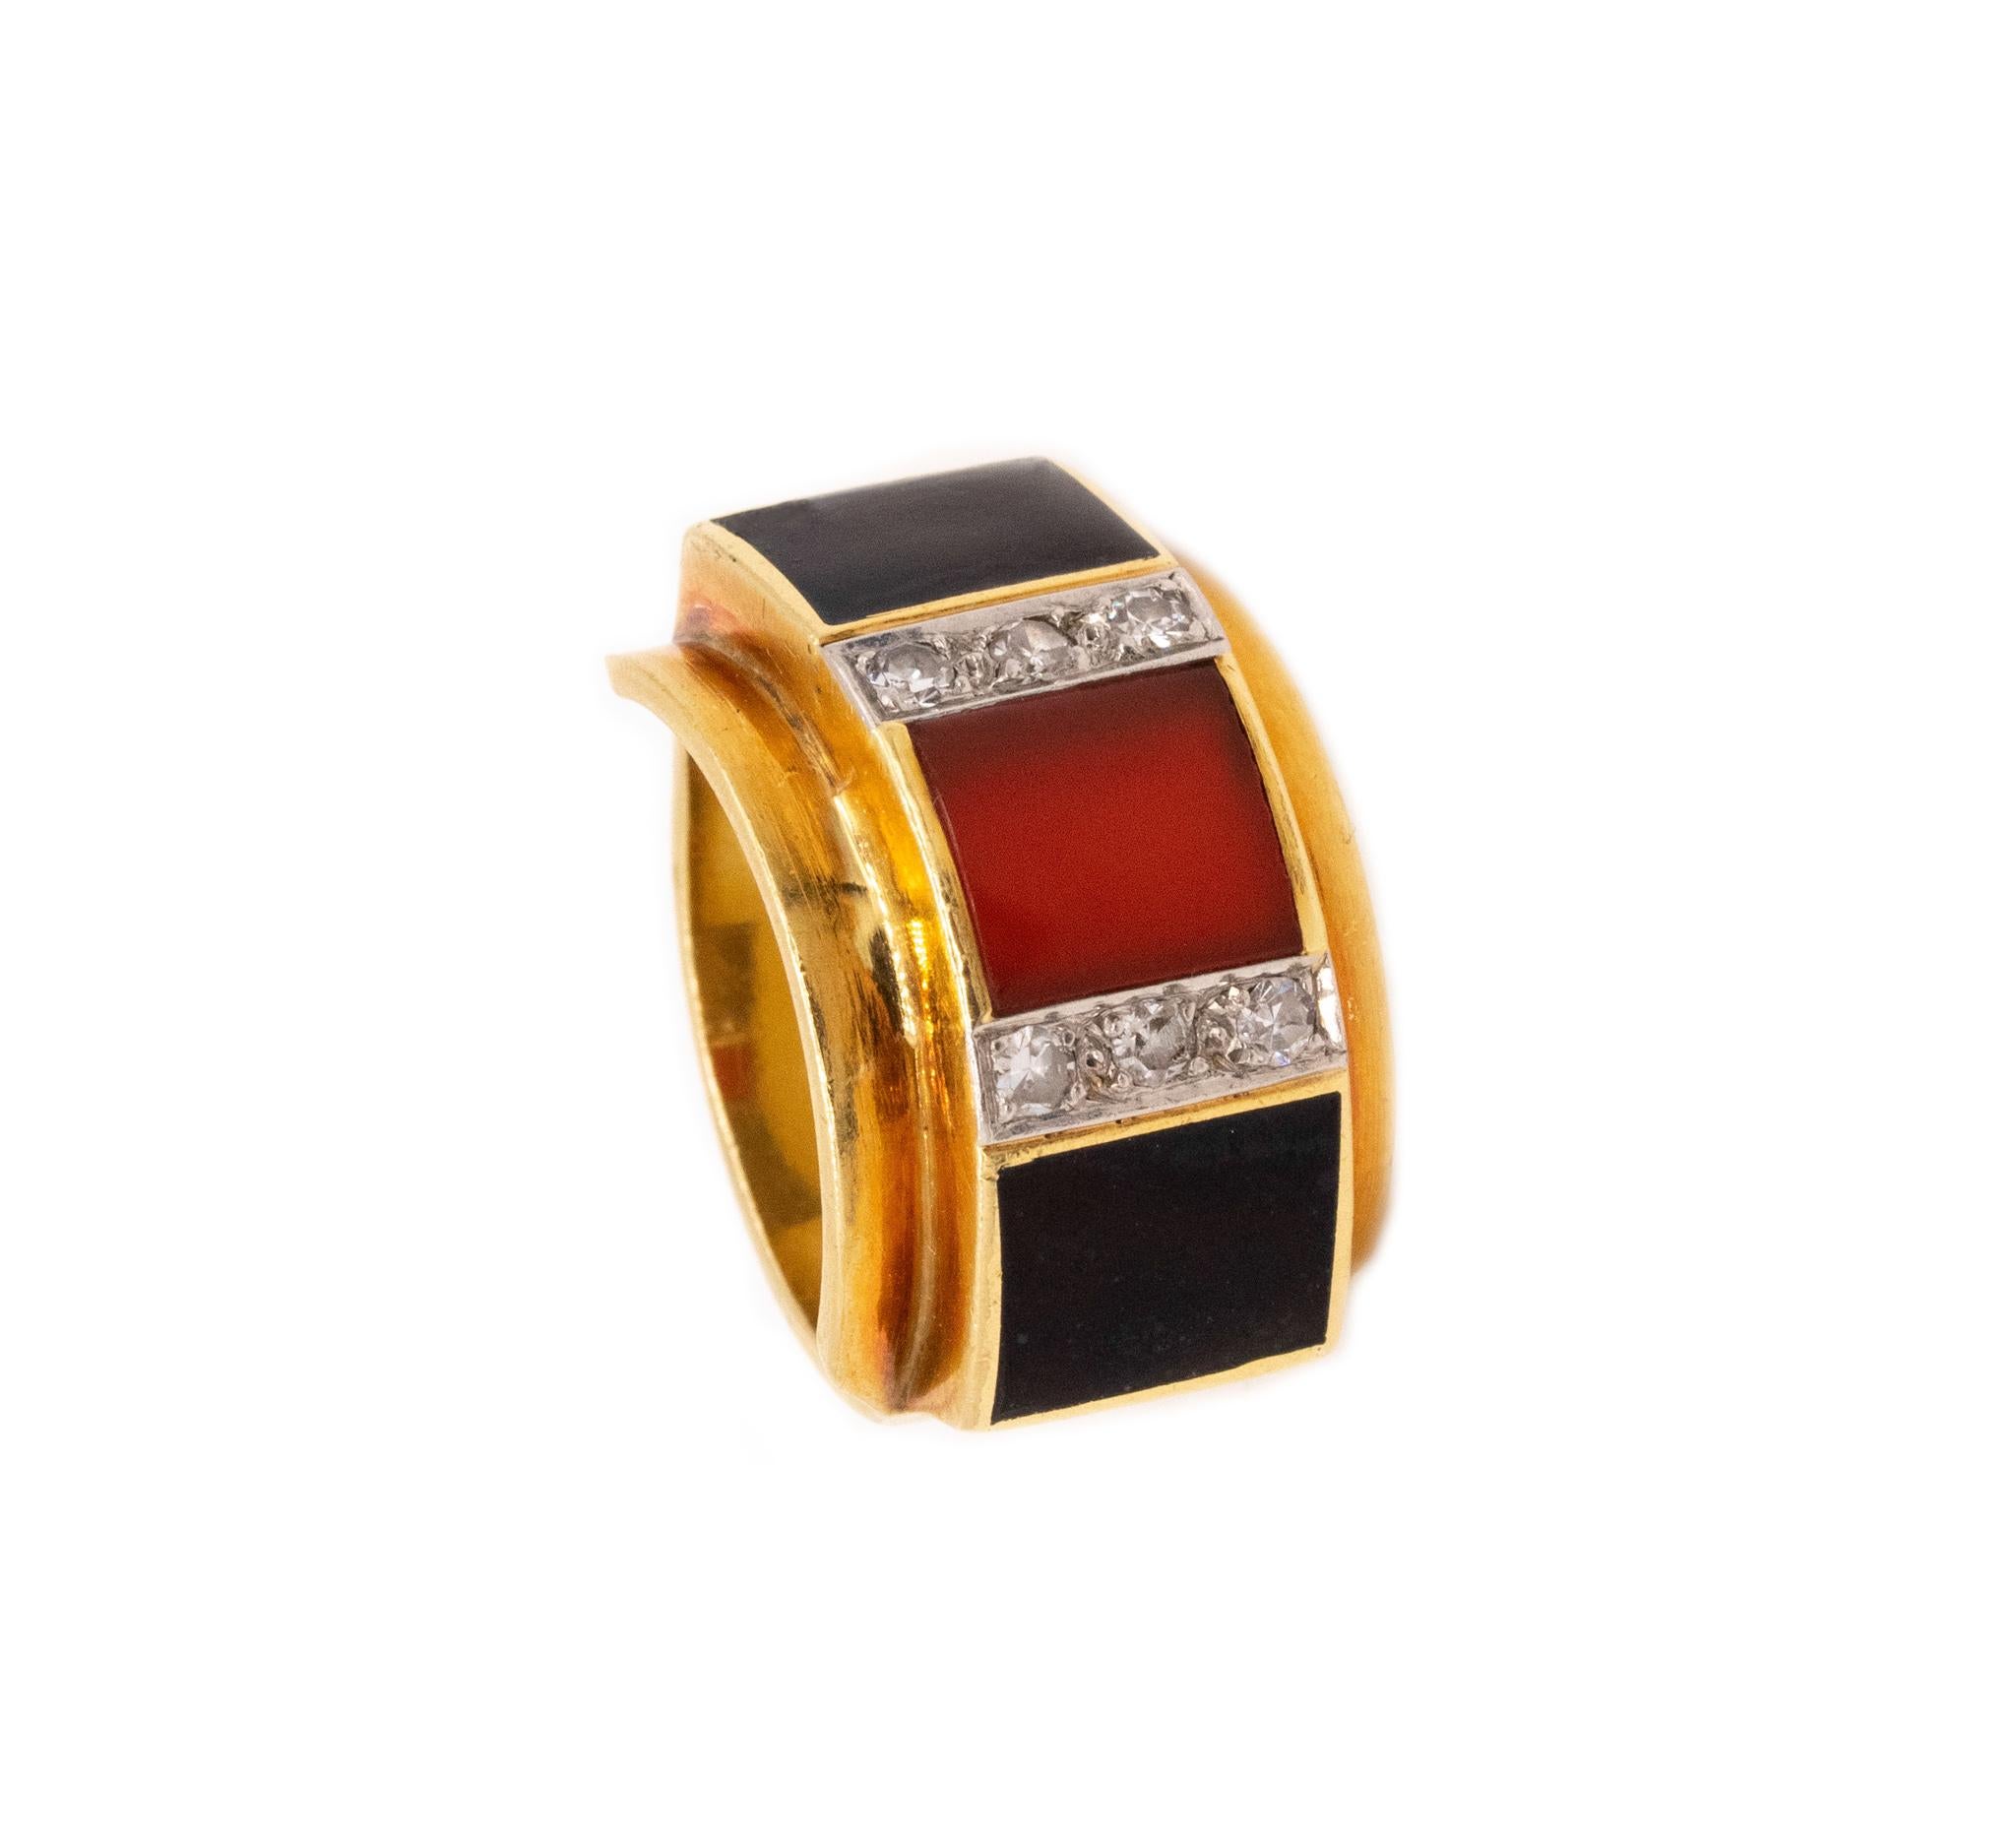 Northern European Modernist ring.

A geometric ring made in the northern Europe region, most probably Germany, circa 1970's. The design of this ring band is composed by three raised geometric squares, crafted in solid yellow gold of 18 karats yellow